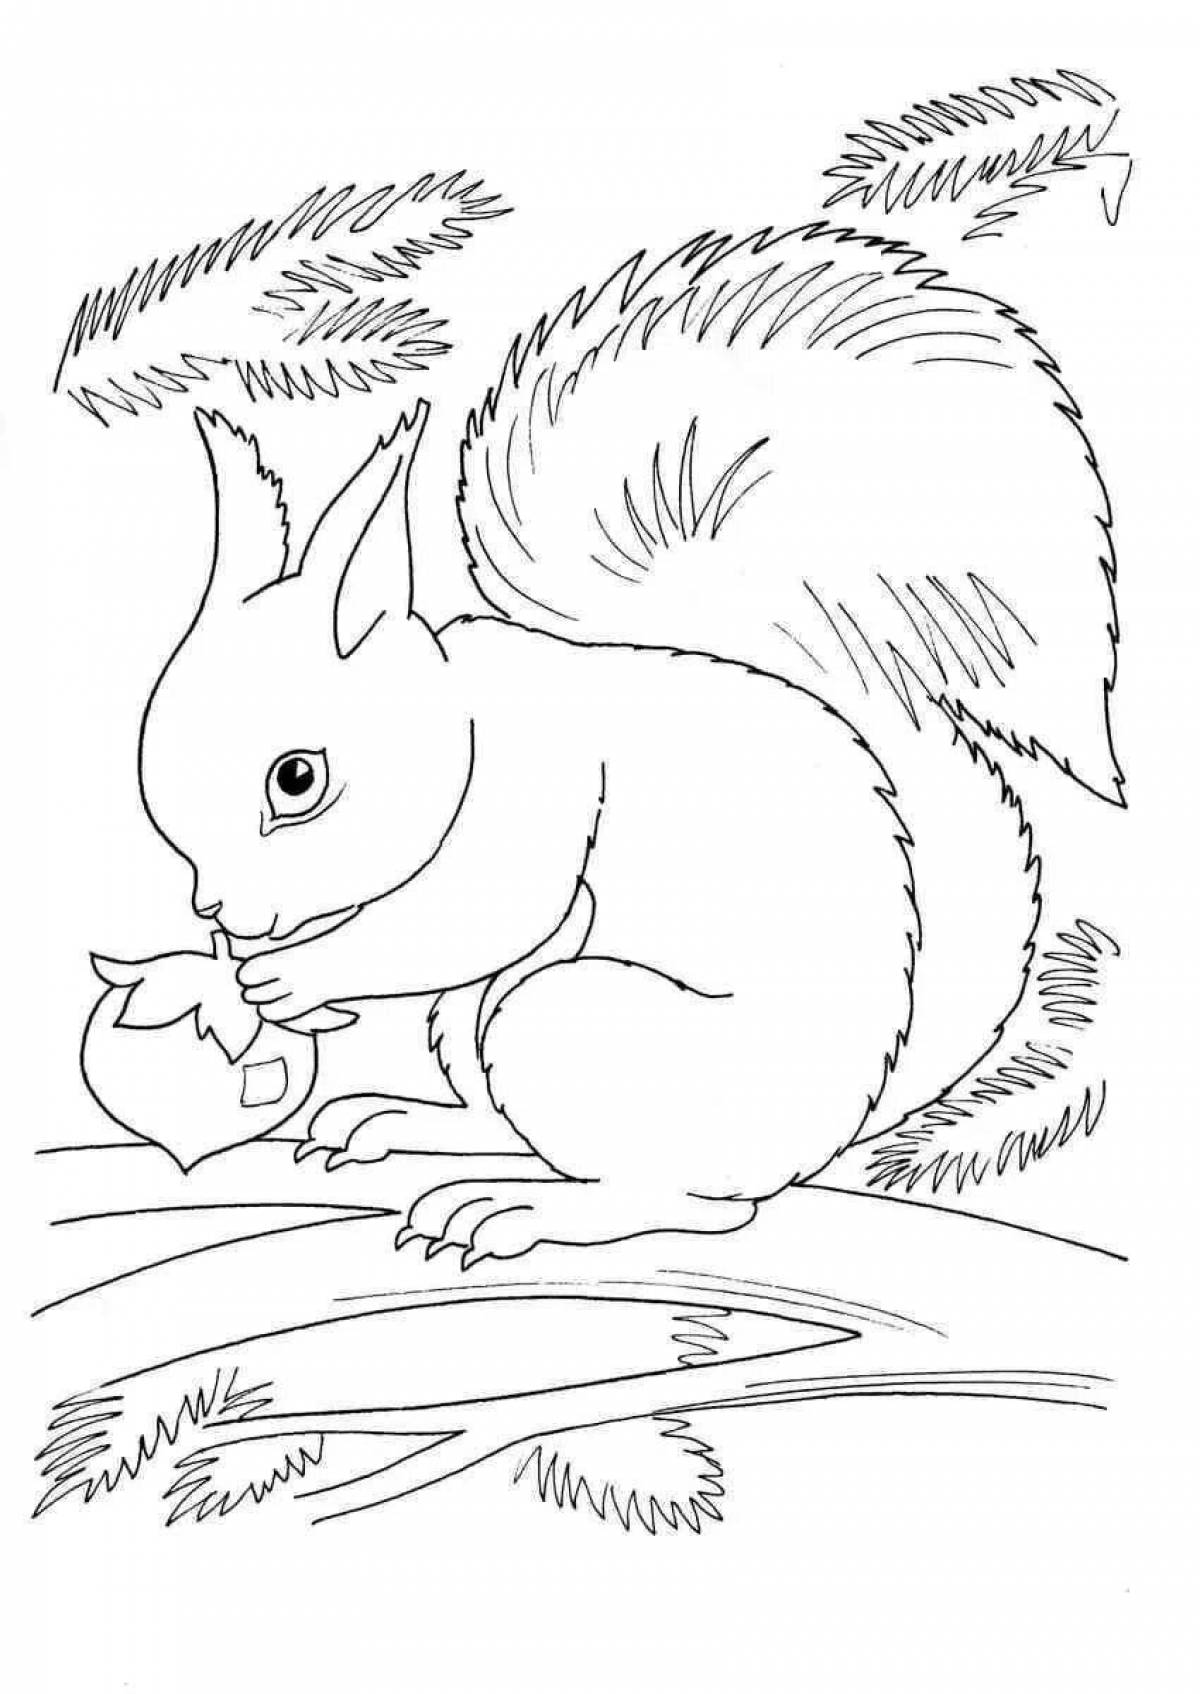 Colorful winter squirrel coloring page